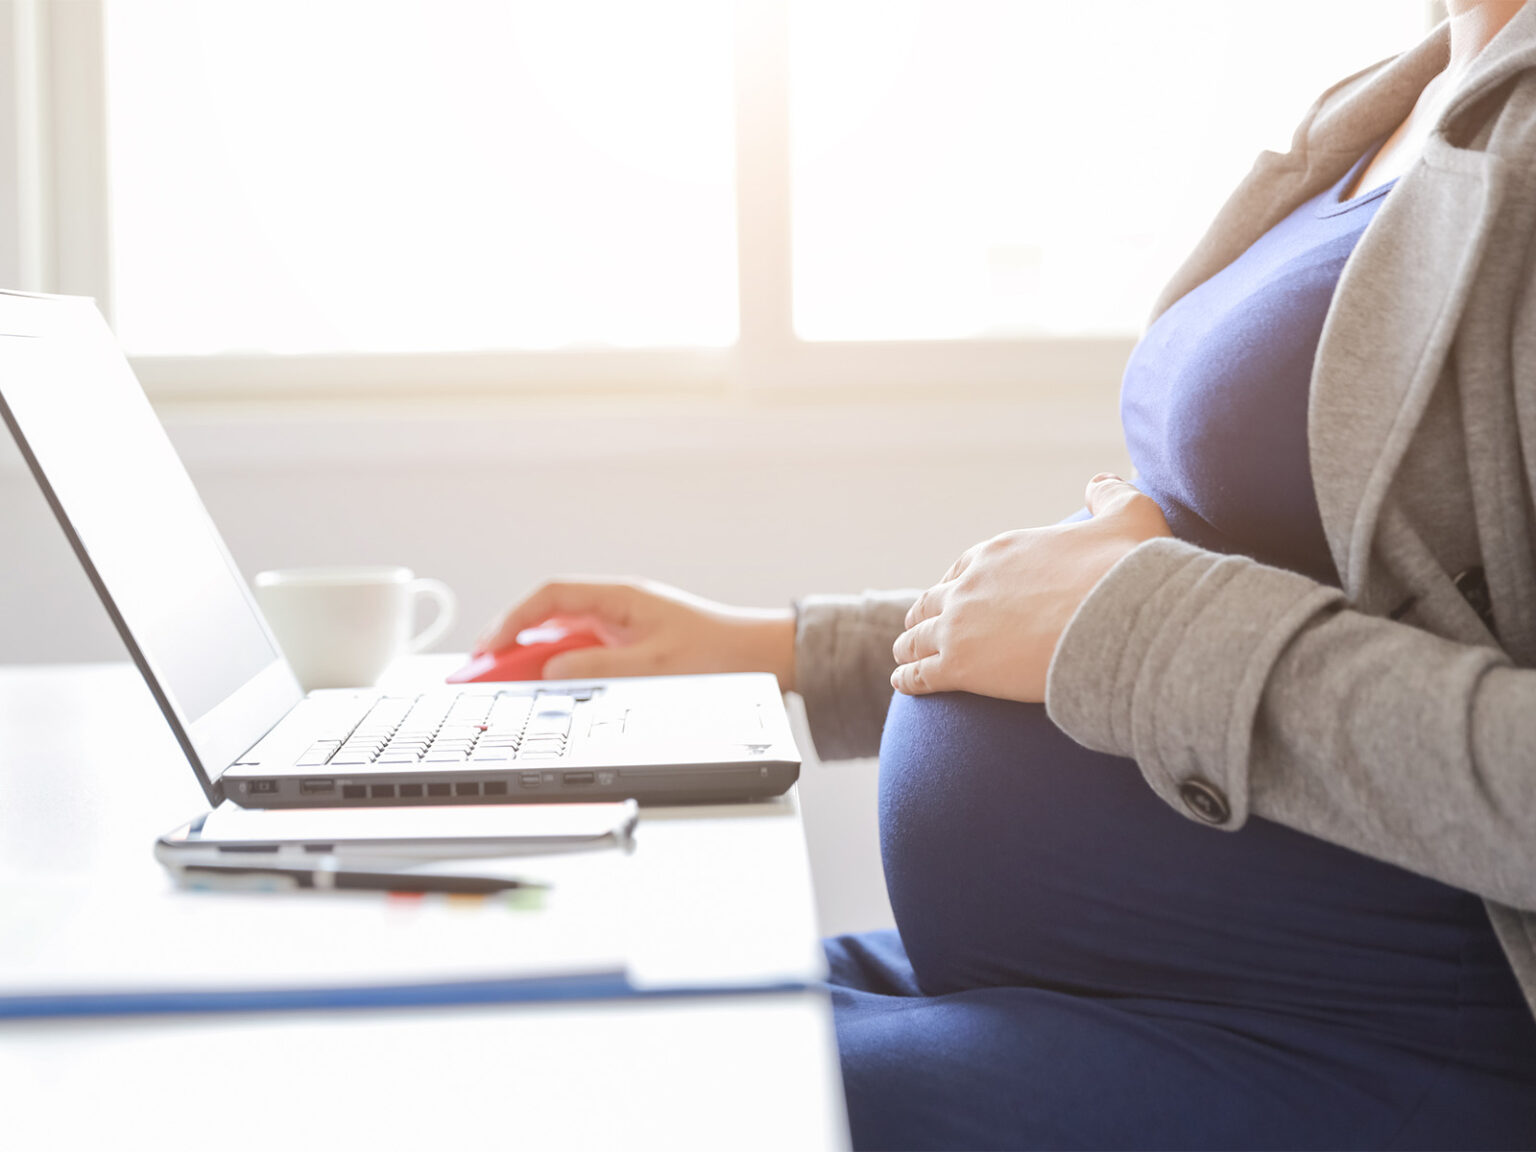 New rules aim to keep moms-to-be in the workforce